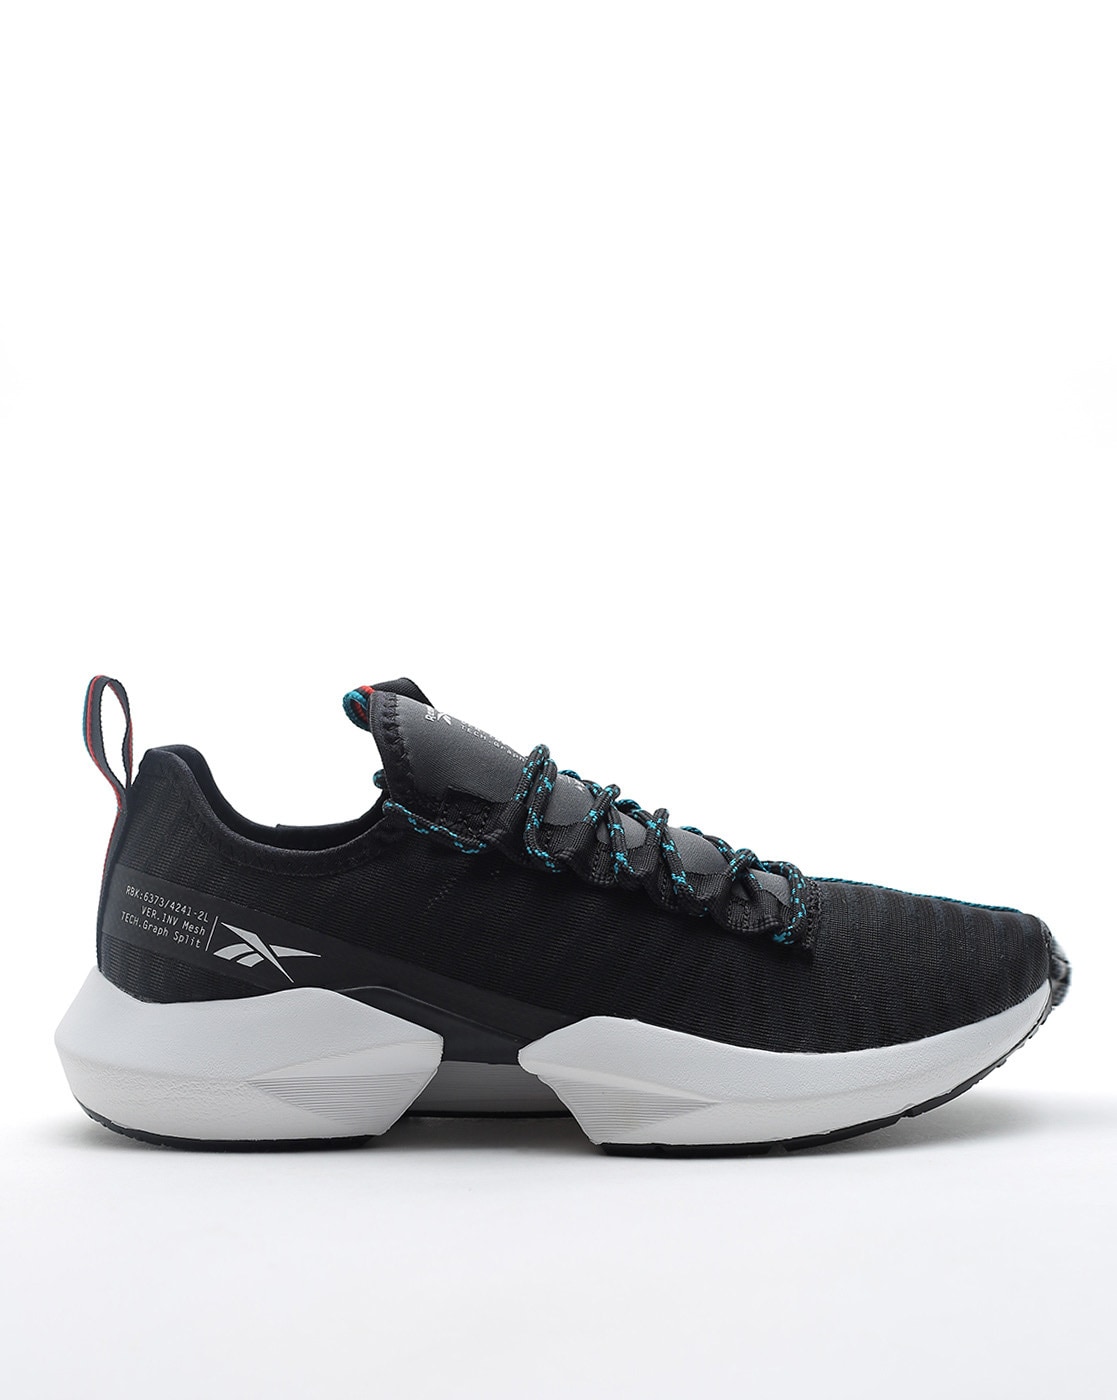 black sports shoes with black sole